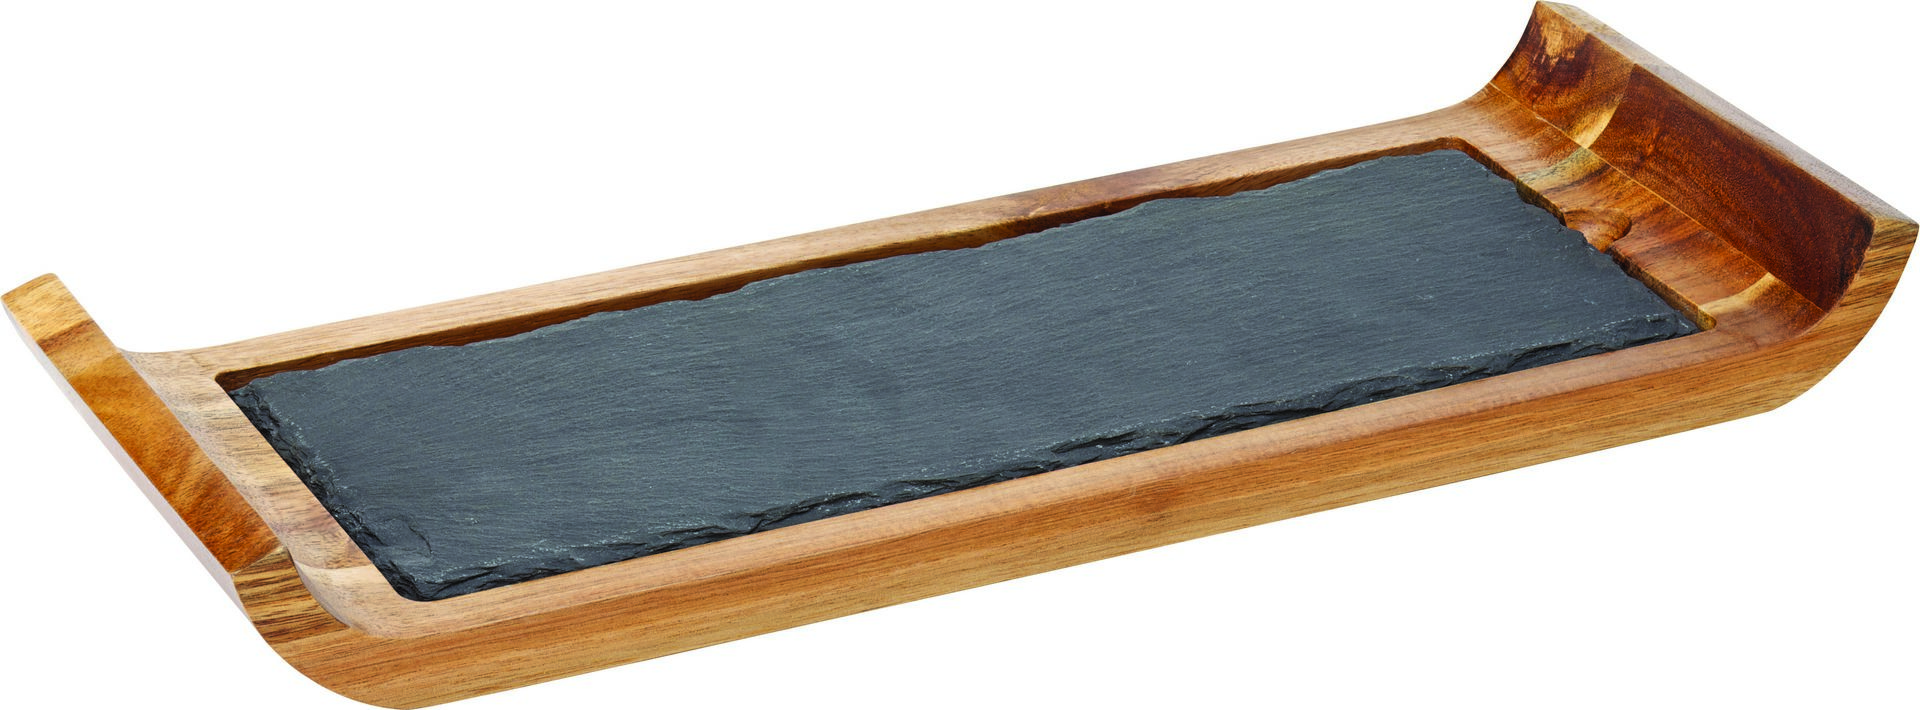 Reversible Acacia Board with Indents 16.25 x 6